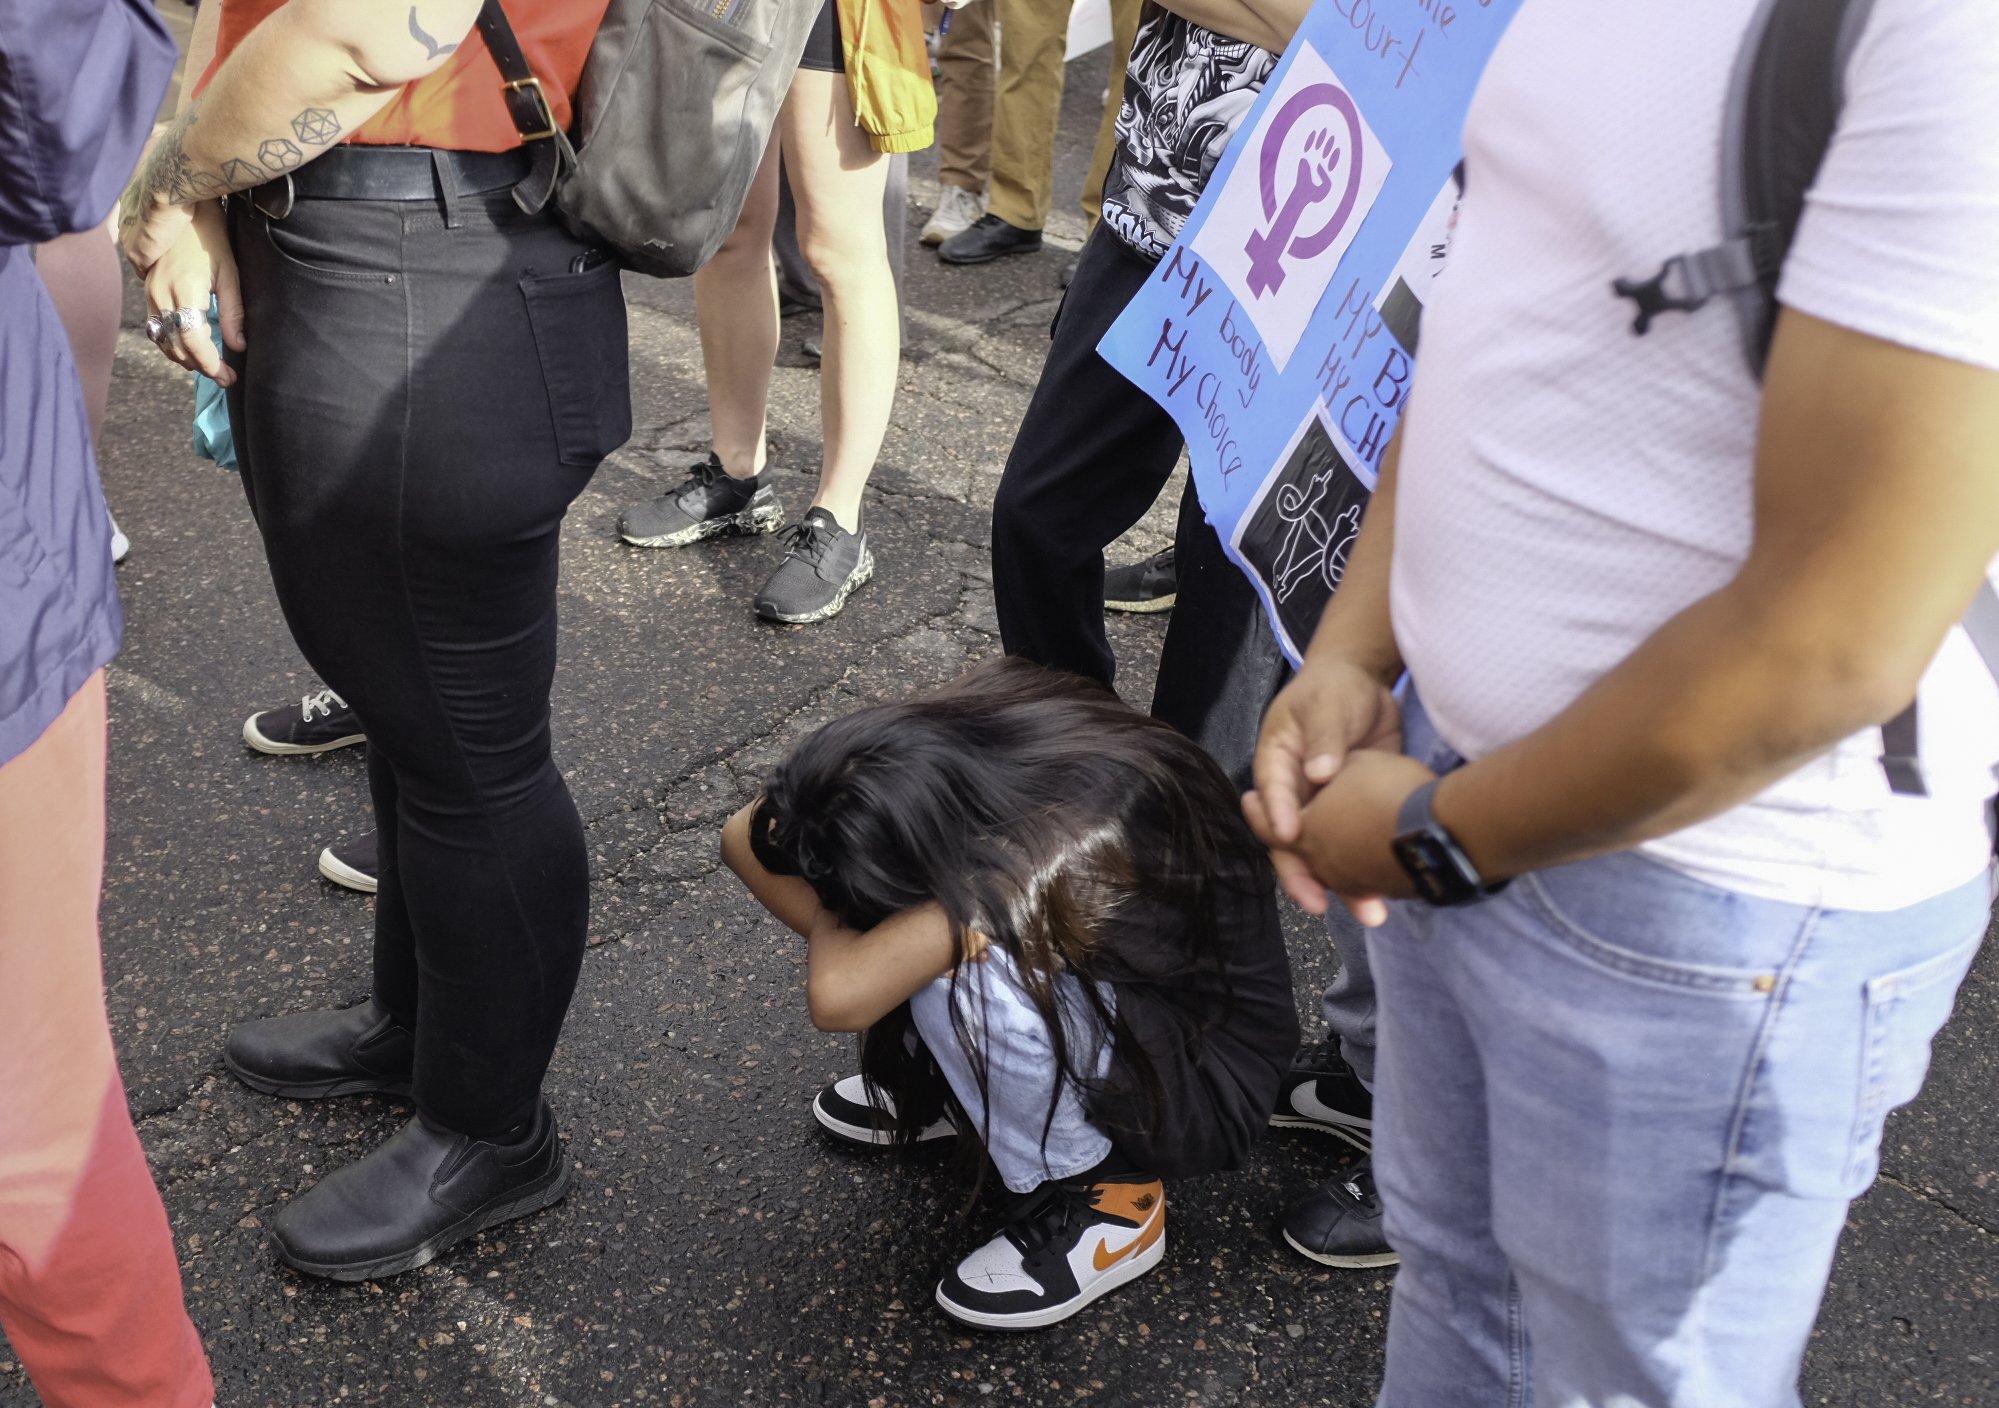 A child at July Abortion protest, Denver, CO